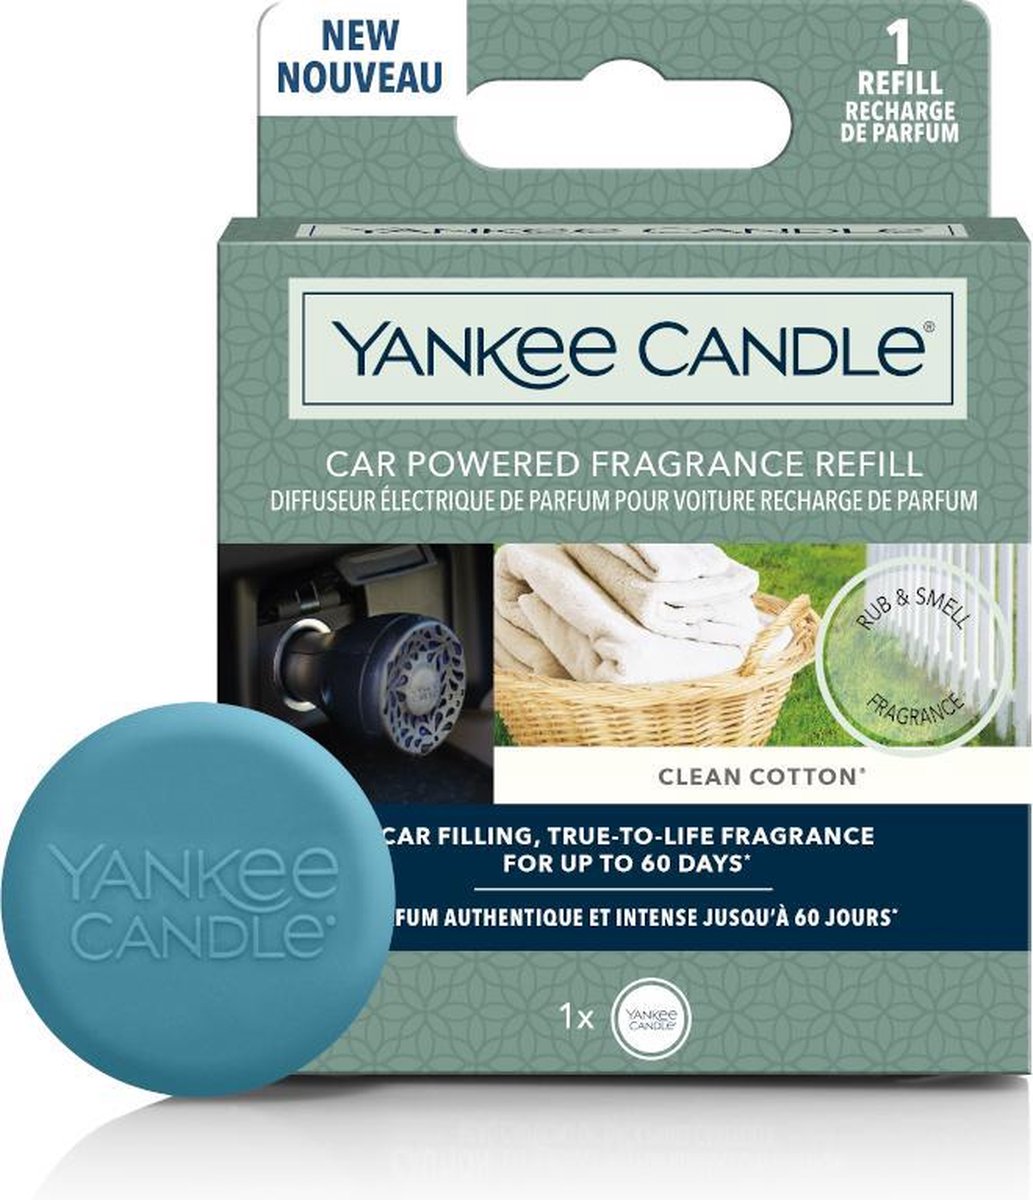 Yankee Candle Car Powered Fragrance Refill Clean Cotton